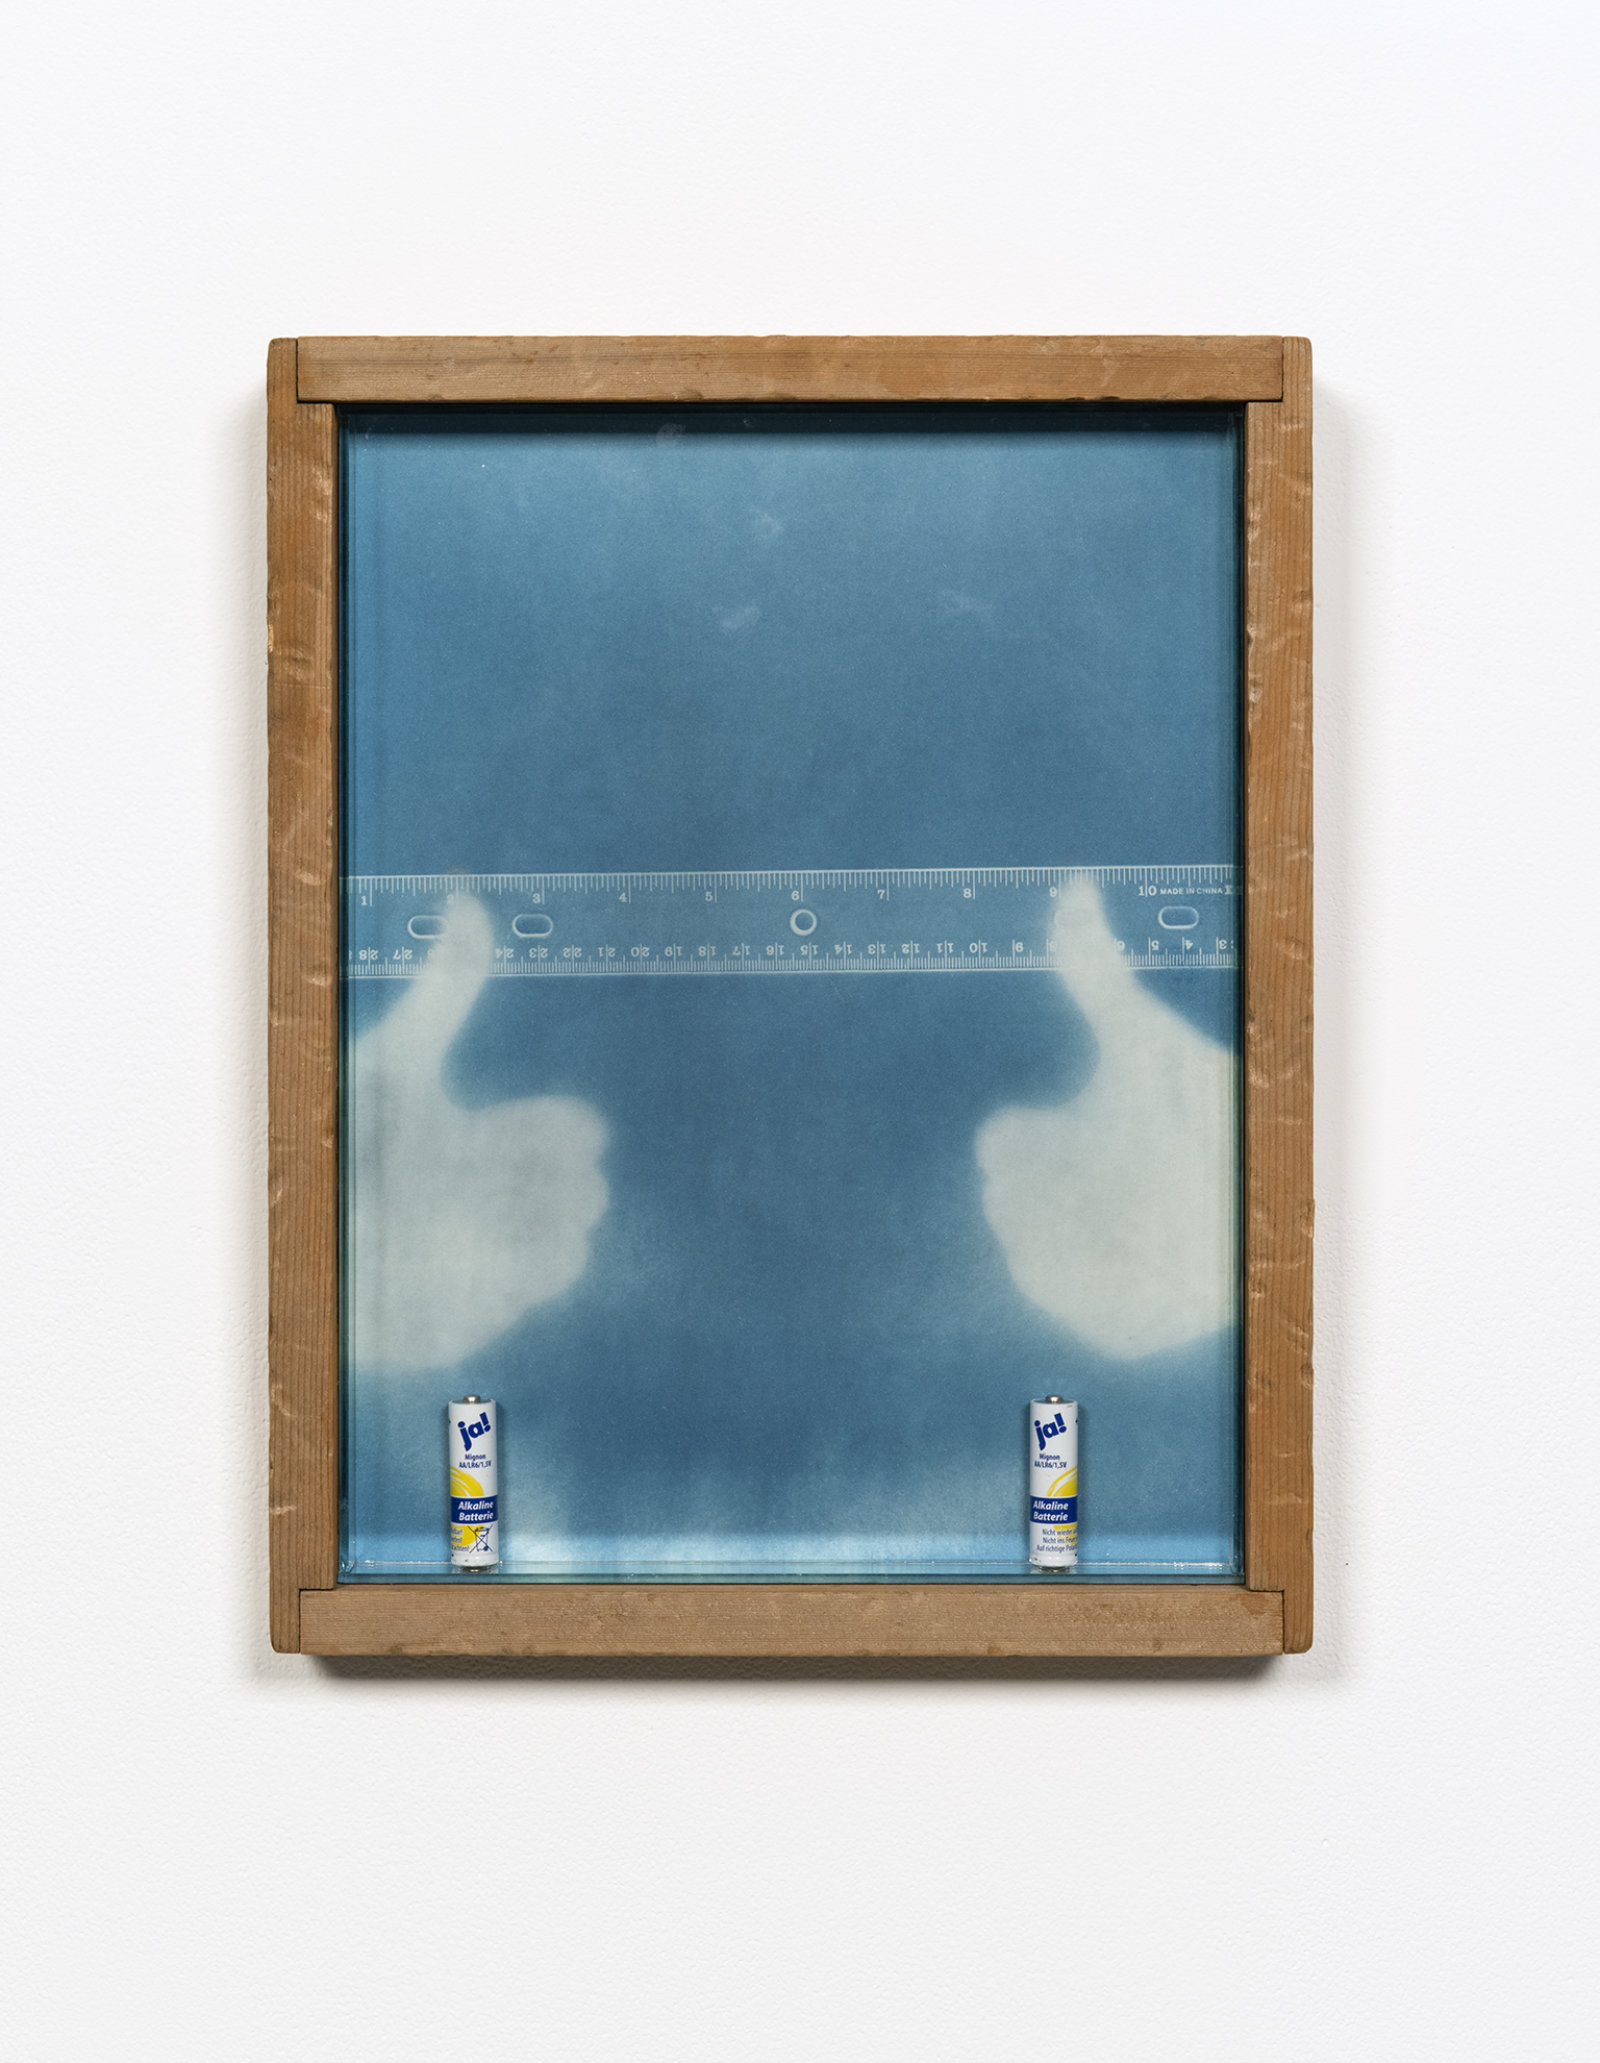 Kasper Feyrer, Rule of thumbs: Double Positive, 2012, antiqued/distressed pine wood frame (beaten with chain, iron oxide stain), cyanotype on watercolour paper, two dead a alkaline batteries, magnets, mirror inset, “new german antique” architectural glass, thumb fingerprints dusted with bi-chromatic fingerprint powder, 15 x 12 in. (38 x 30 cm)